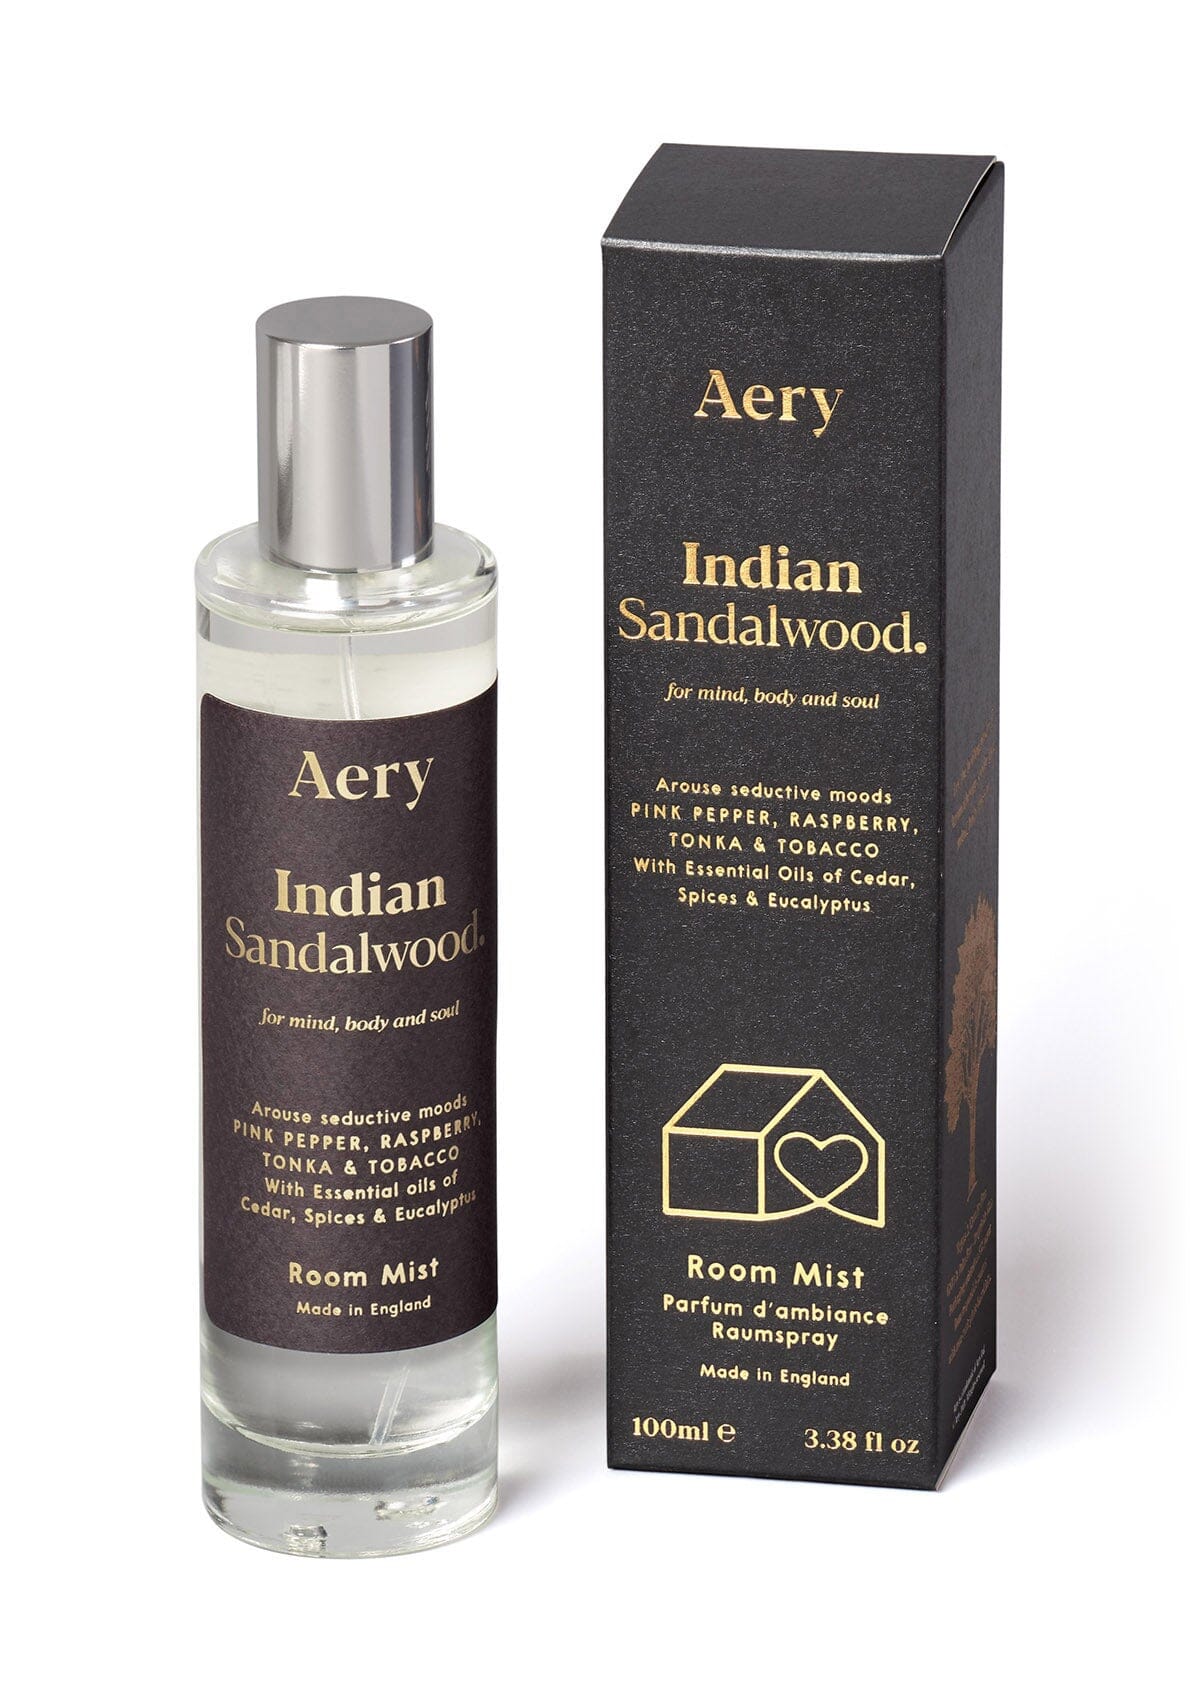 Black Indian Sandalwood room mist displayed next to product packaging by Aery on white background 